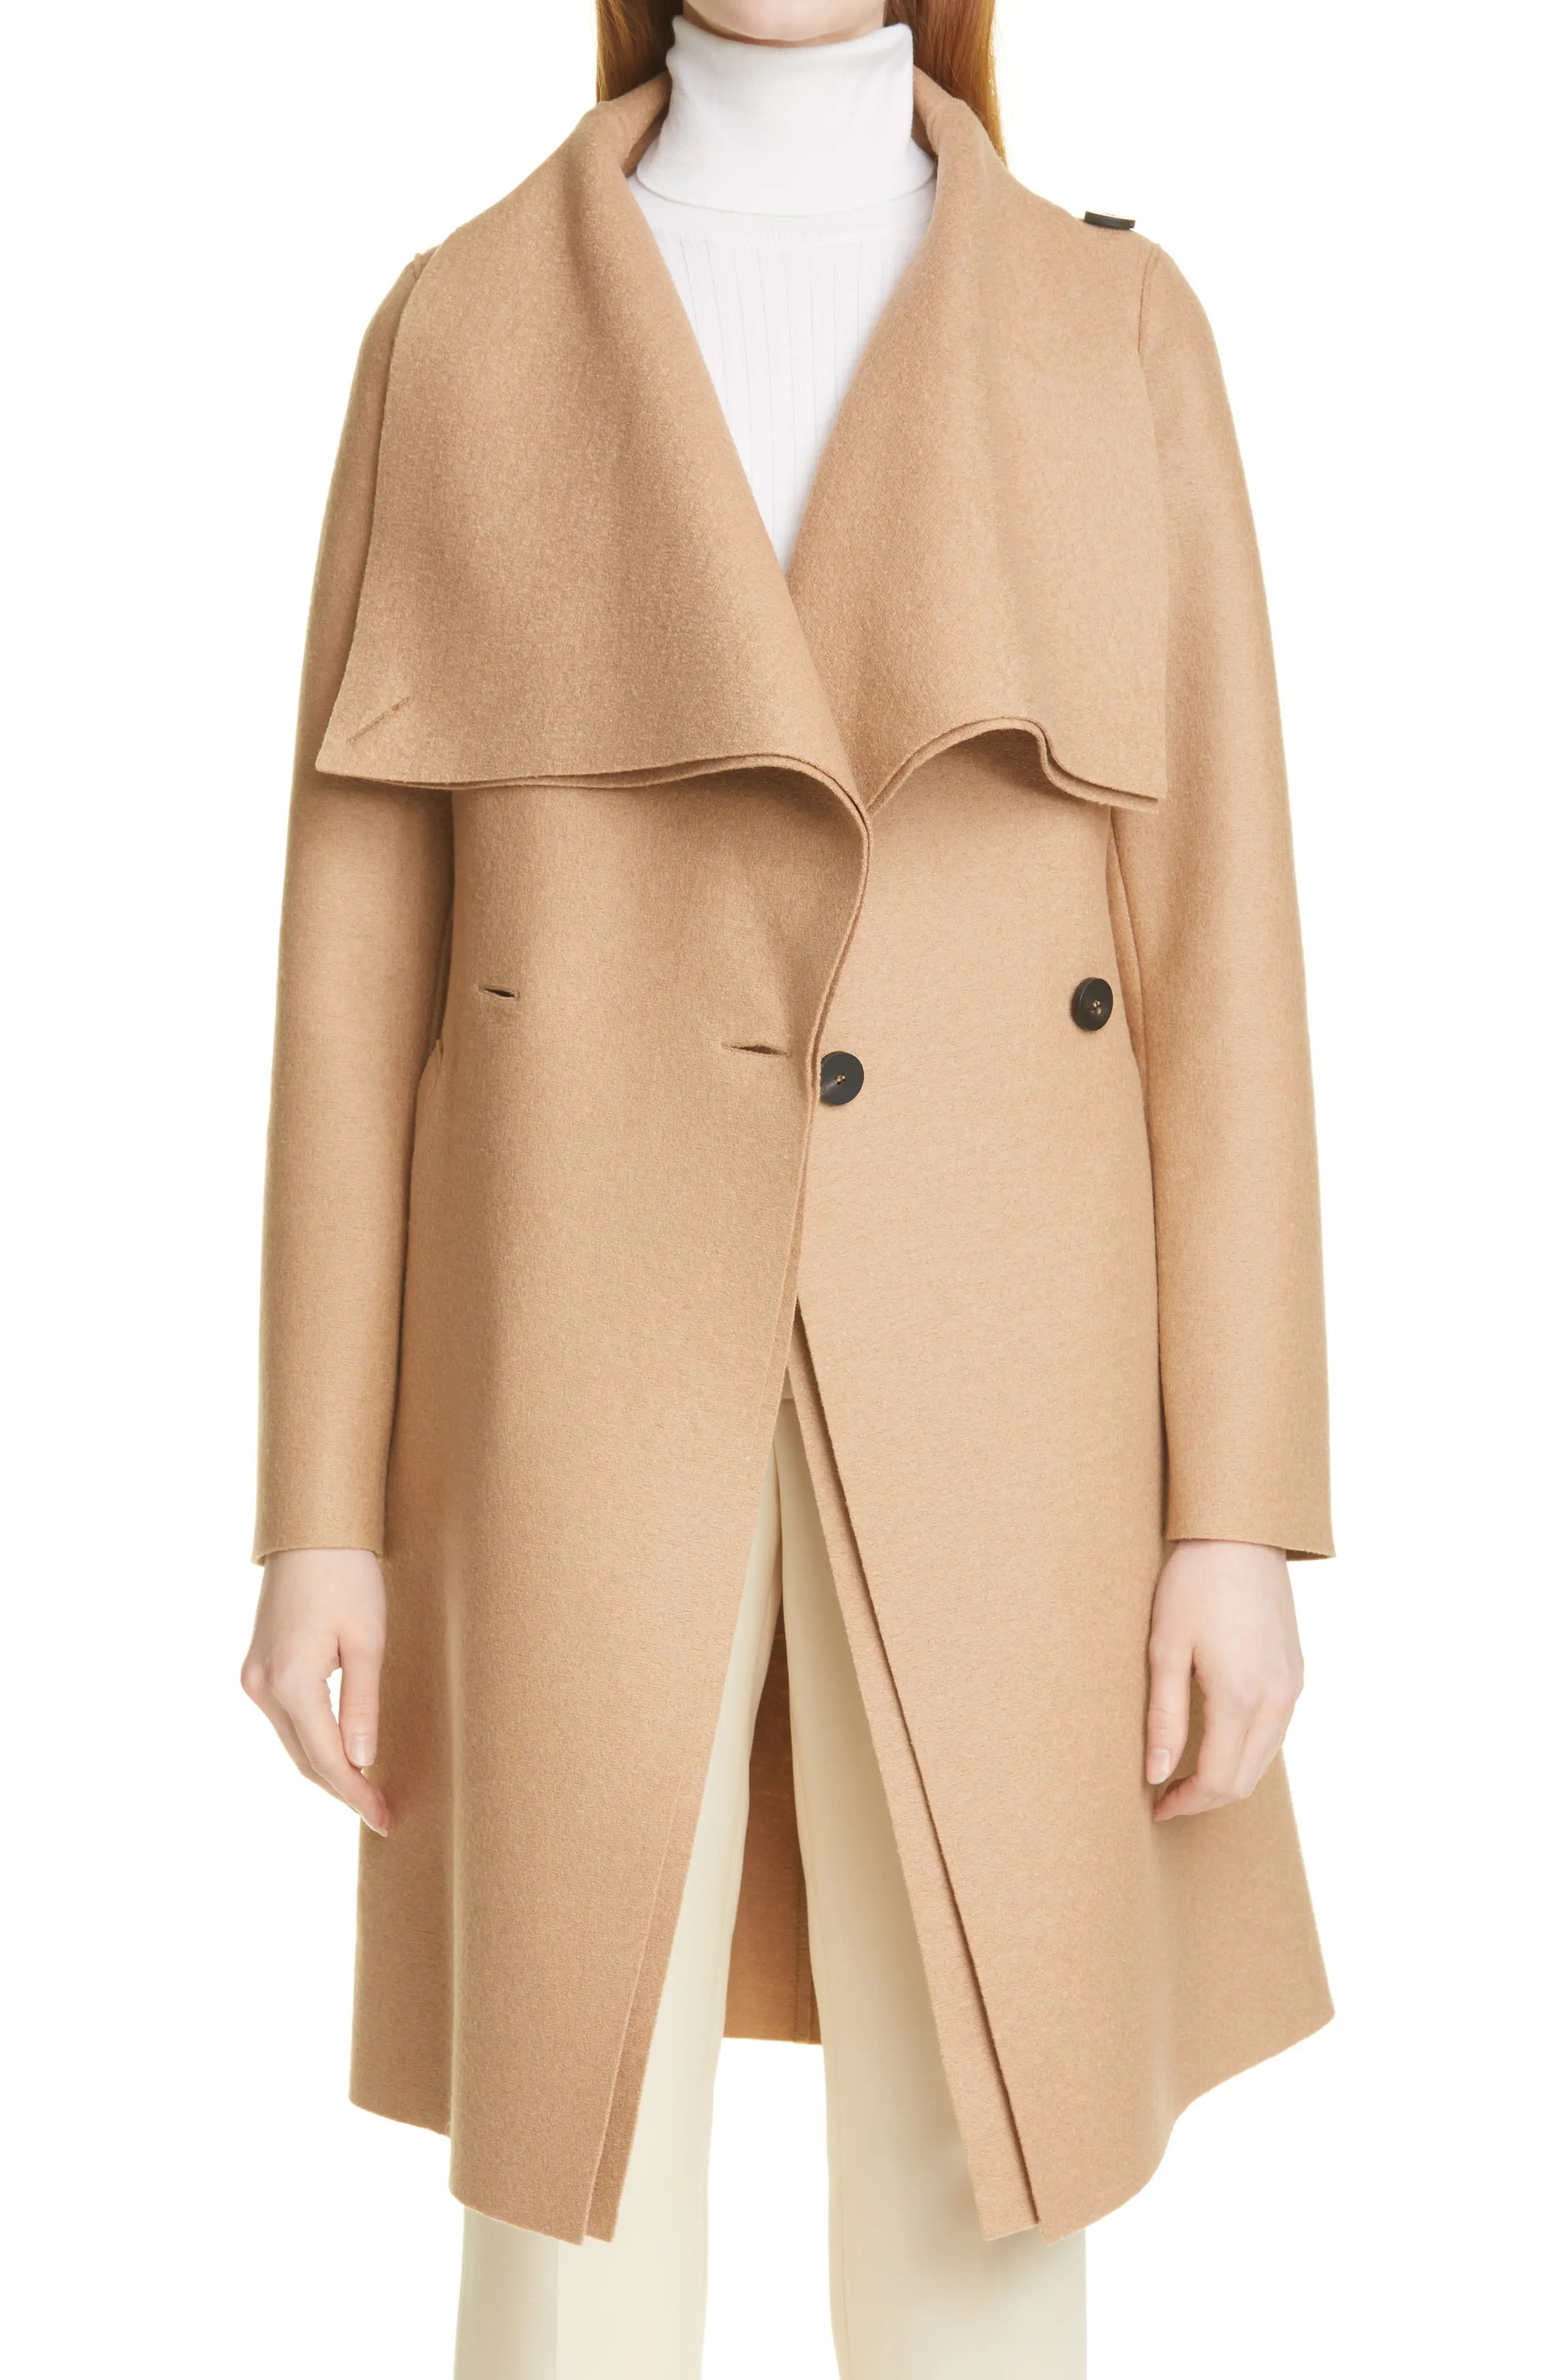 Harris Wharf London Volcano Belted Pressed Wool Coat, Size 2 Us in Tan at Nordstrom | Nordstrom